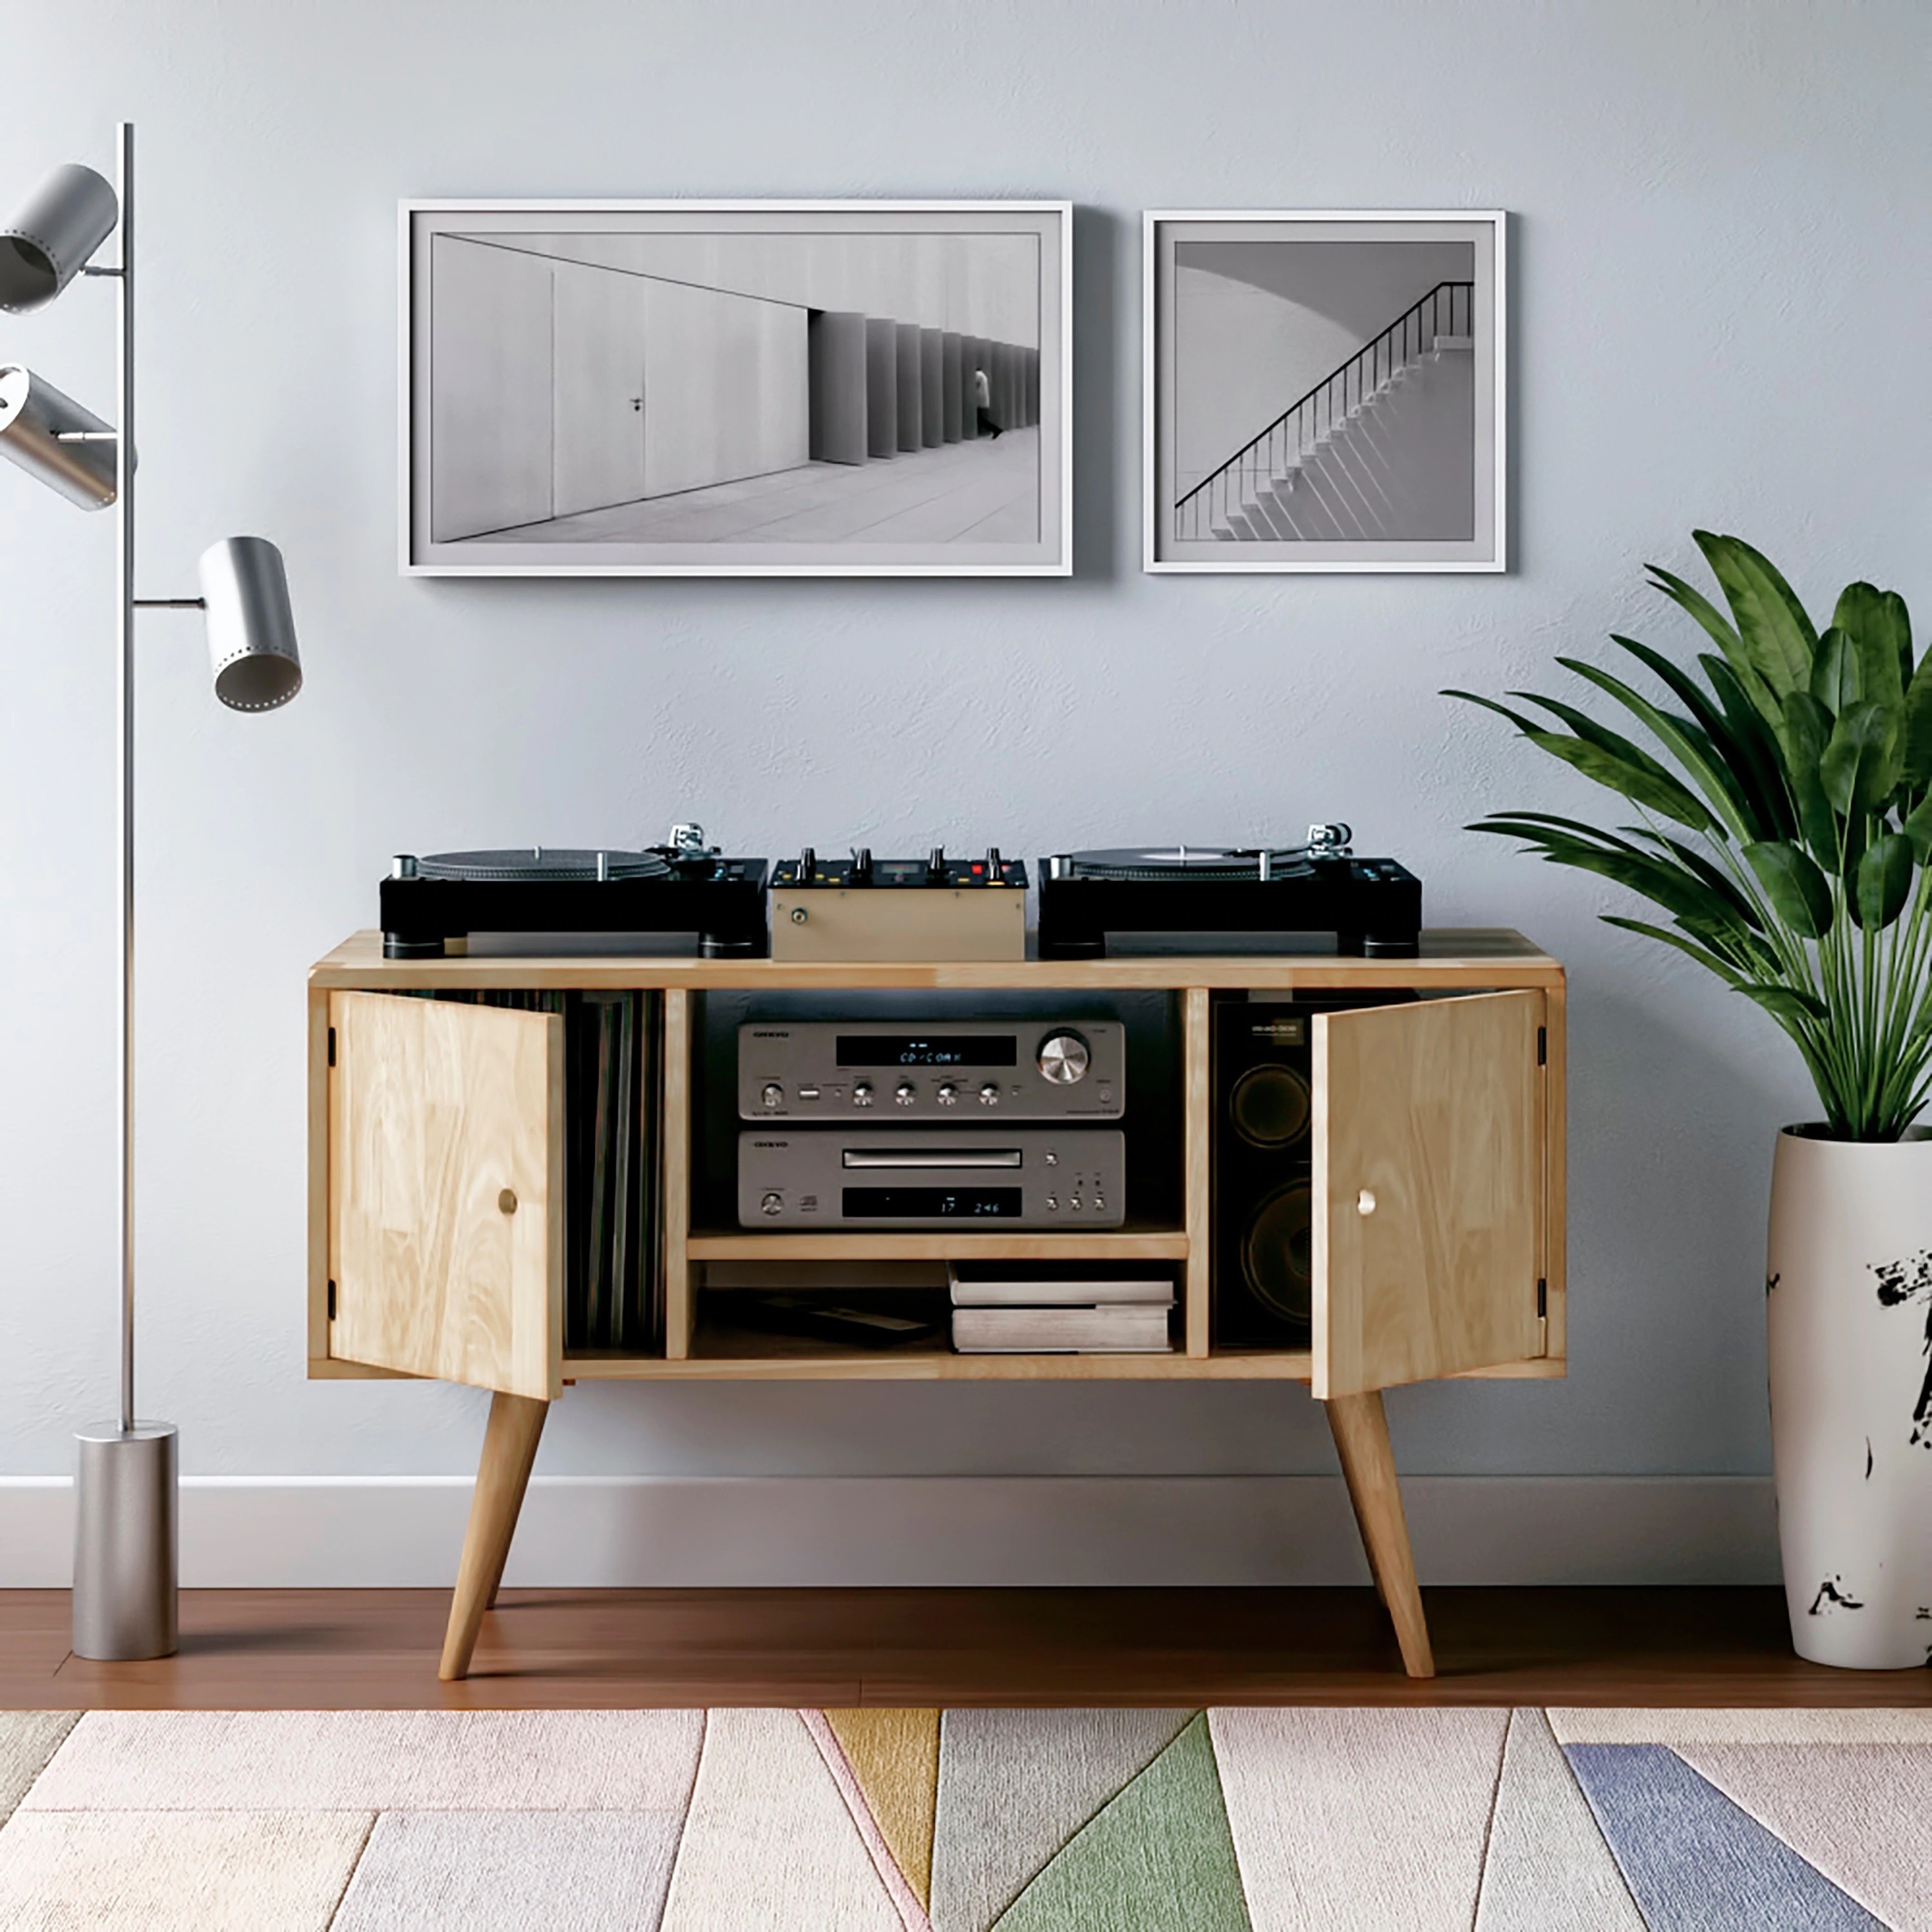 Decorate Your Wood Stereo Cabinet with Your Favorite Vinyl